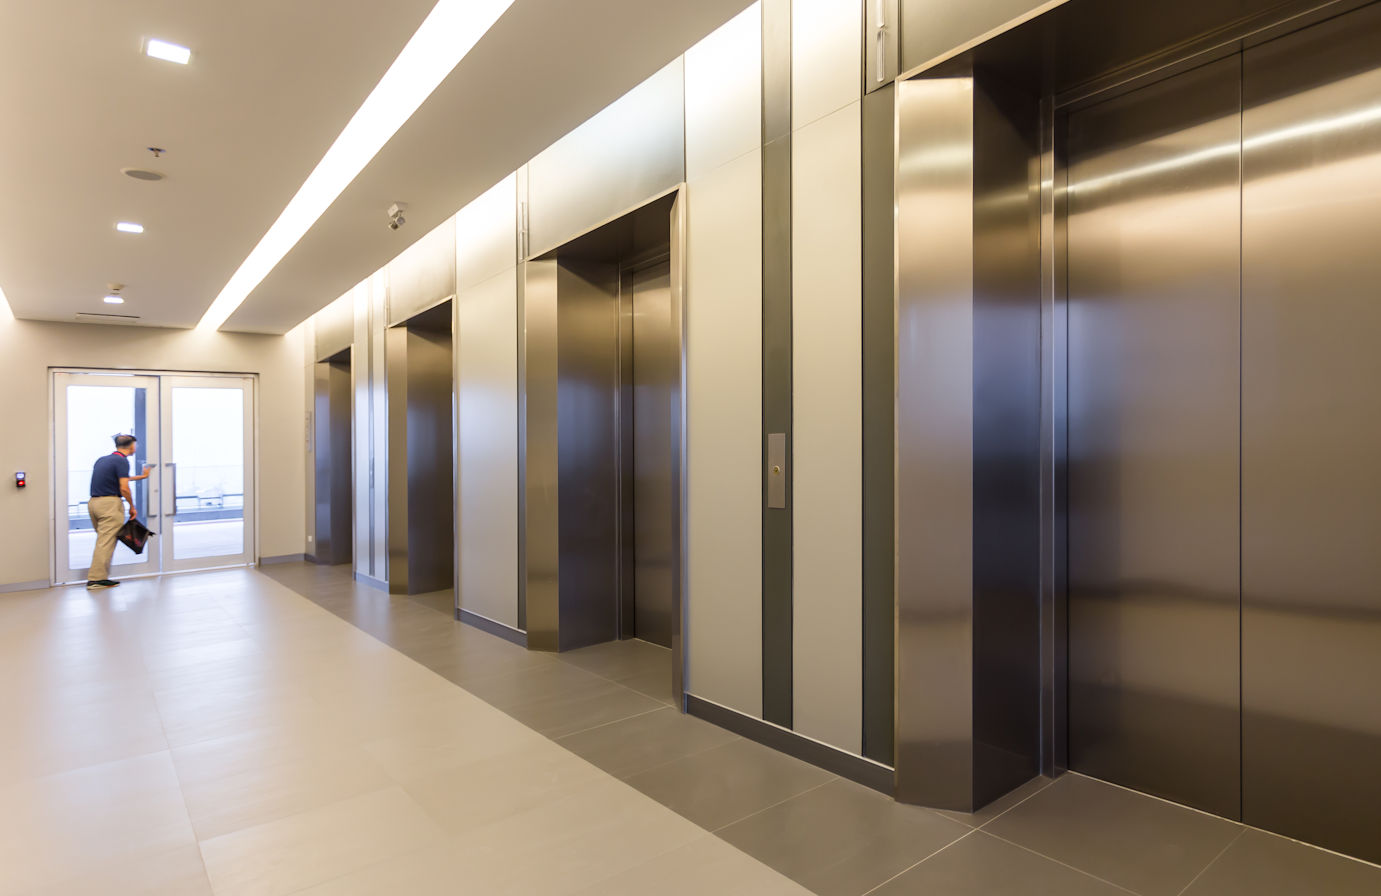 code-update-elevator-lobby-exit-access-doors-i-dig-hardware-answers-to-your-door-hardware-and-code-questions-from-allegion-s-lori-greene